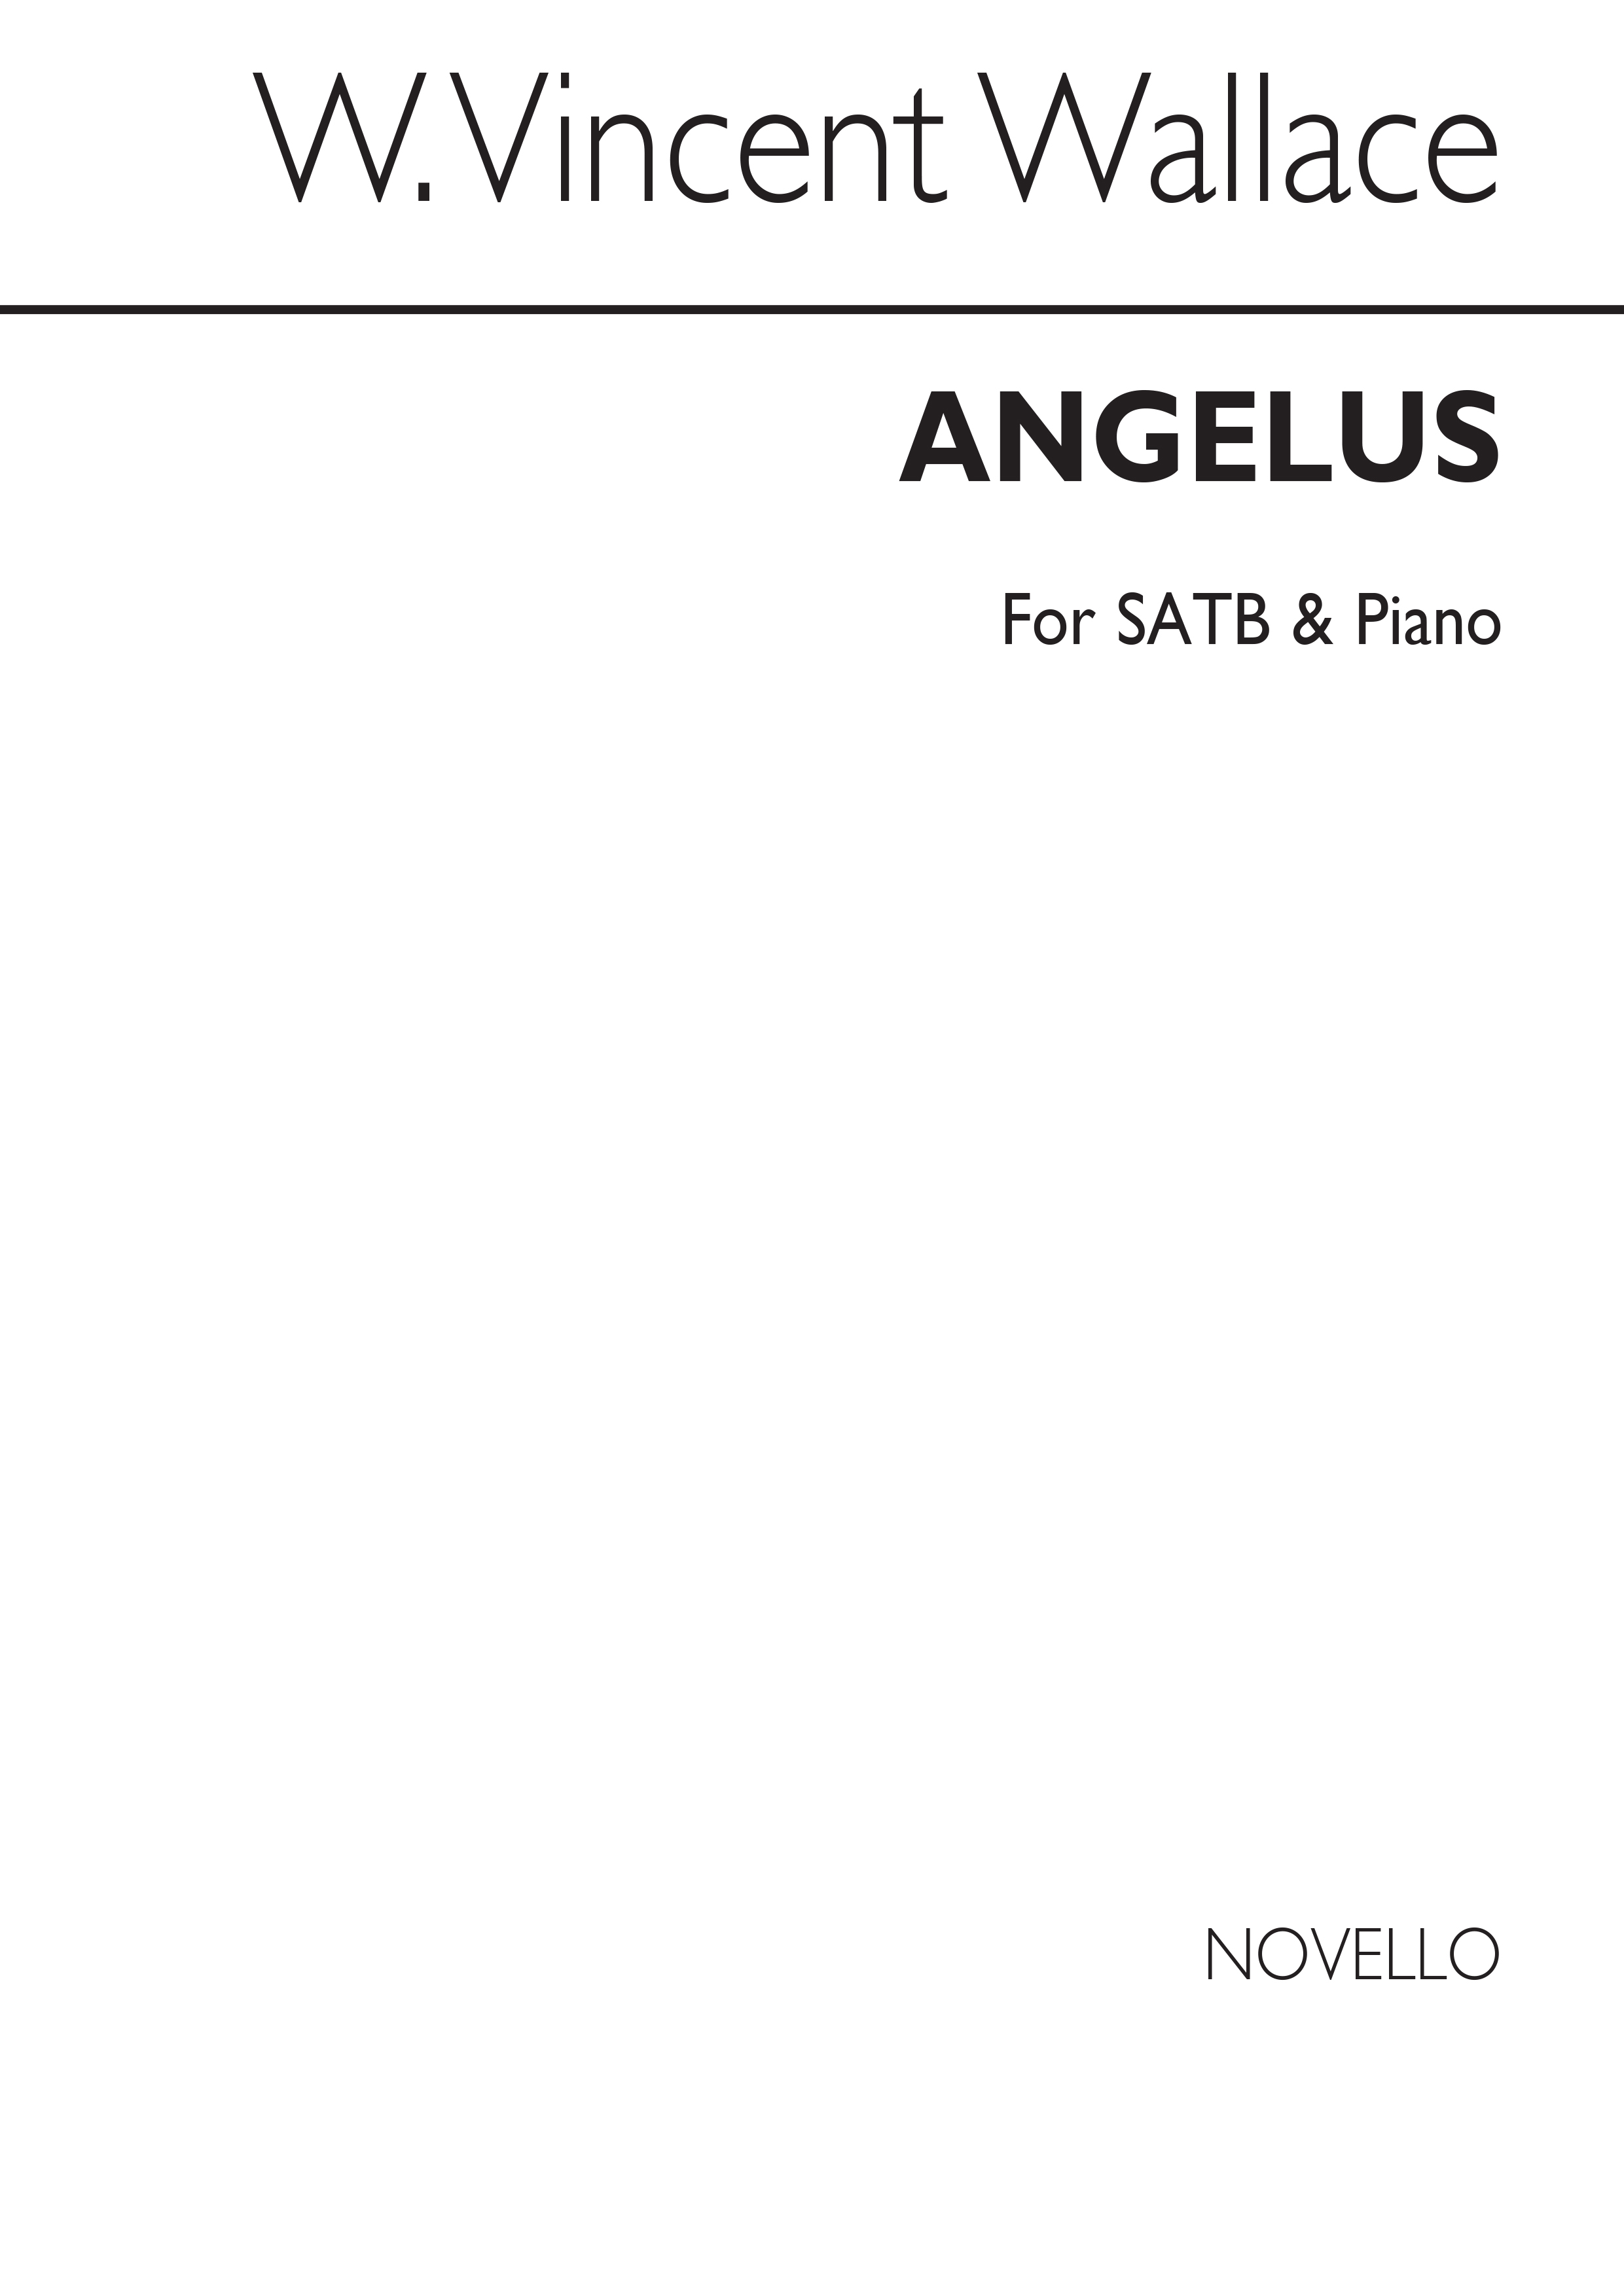 William Vincent Wallace: Angelus SATB/Piano